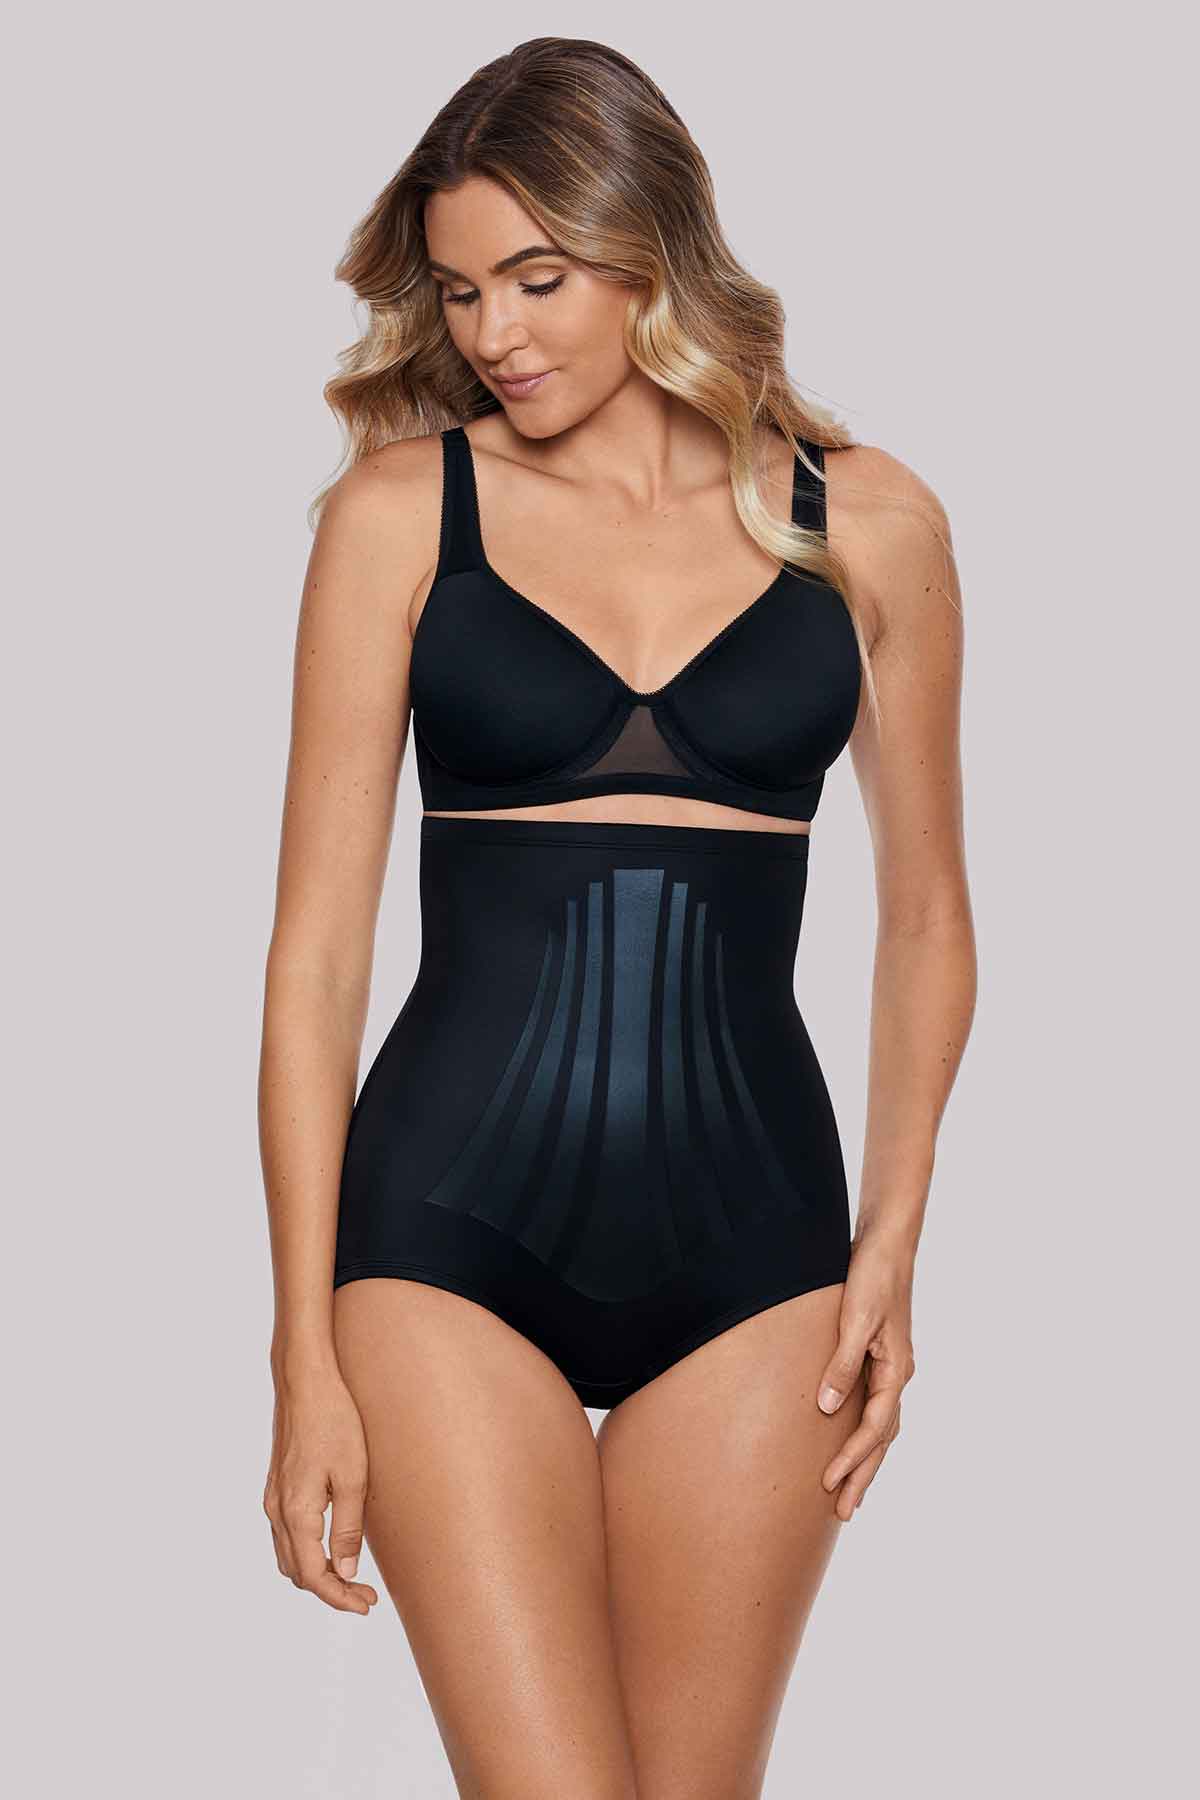 SPANX In-Power Line Firm Control High-Waist Shaper & Reviews